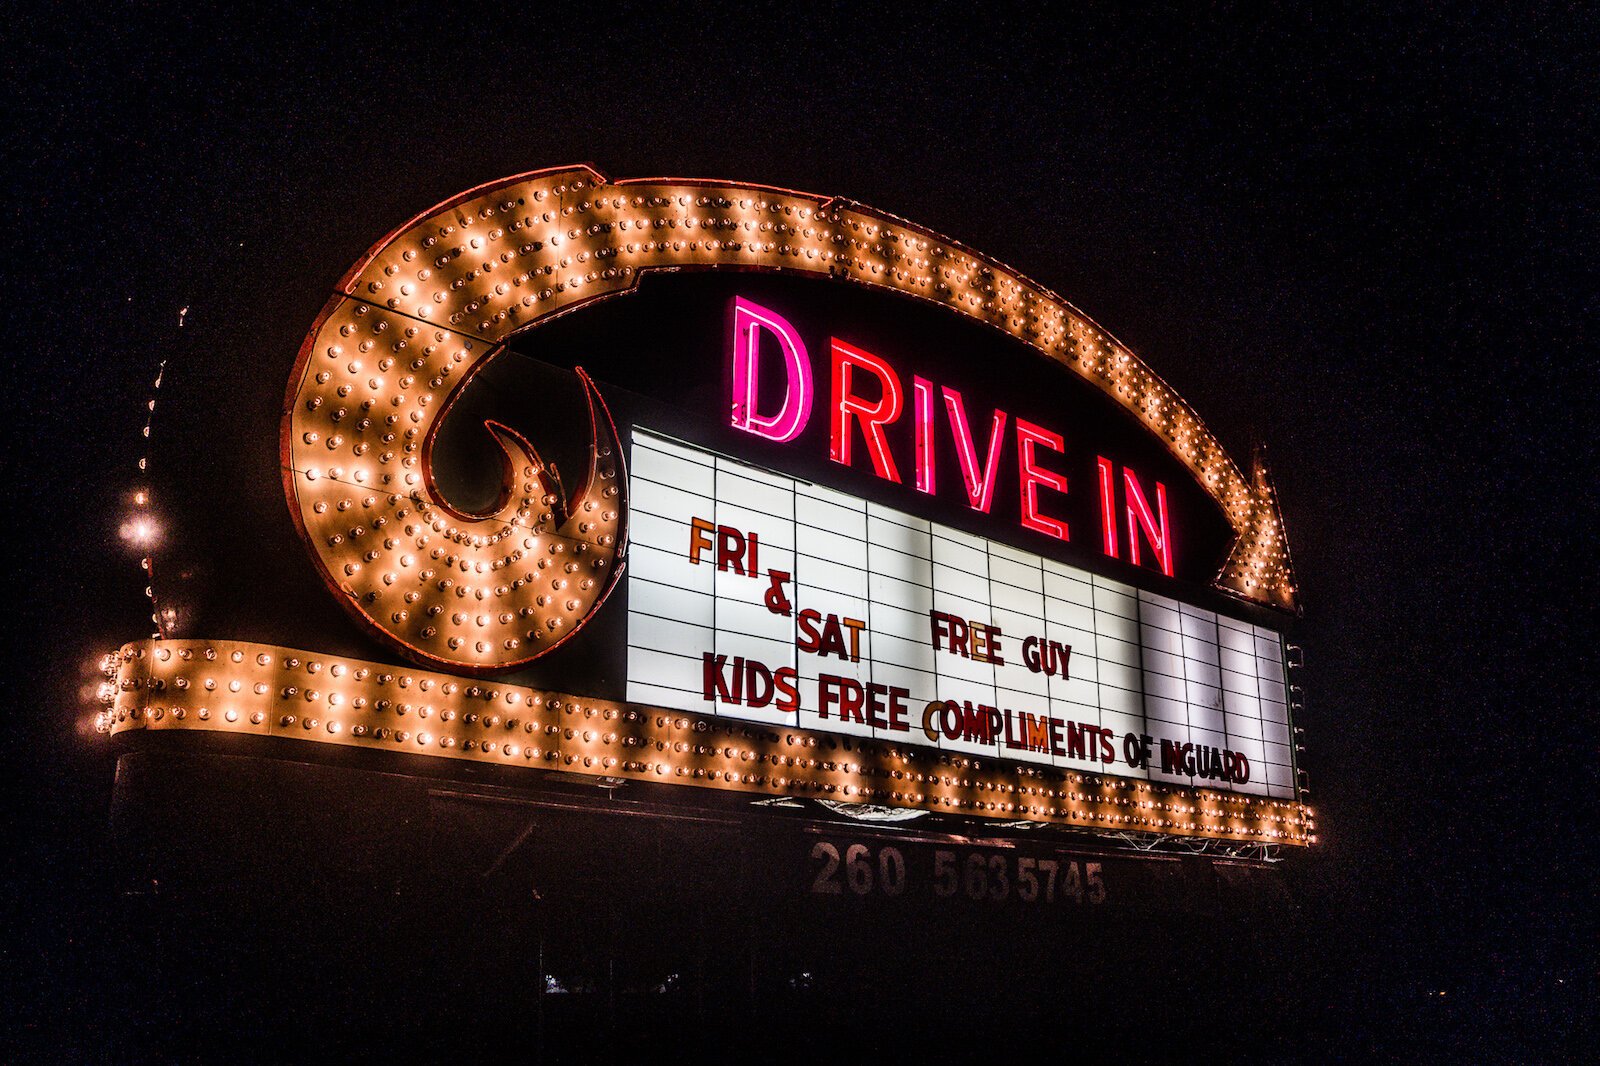 The Historic 13-24 Drive-In in Wabash is located at 890 IN-13.